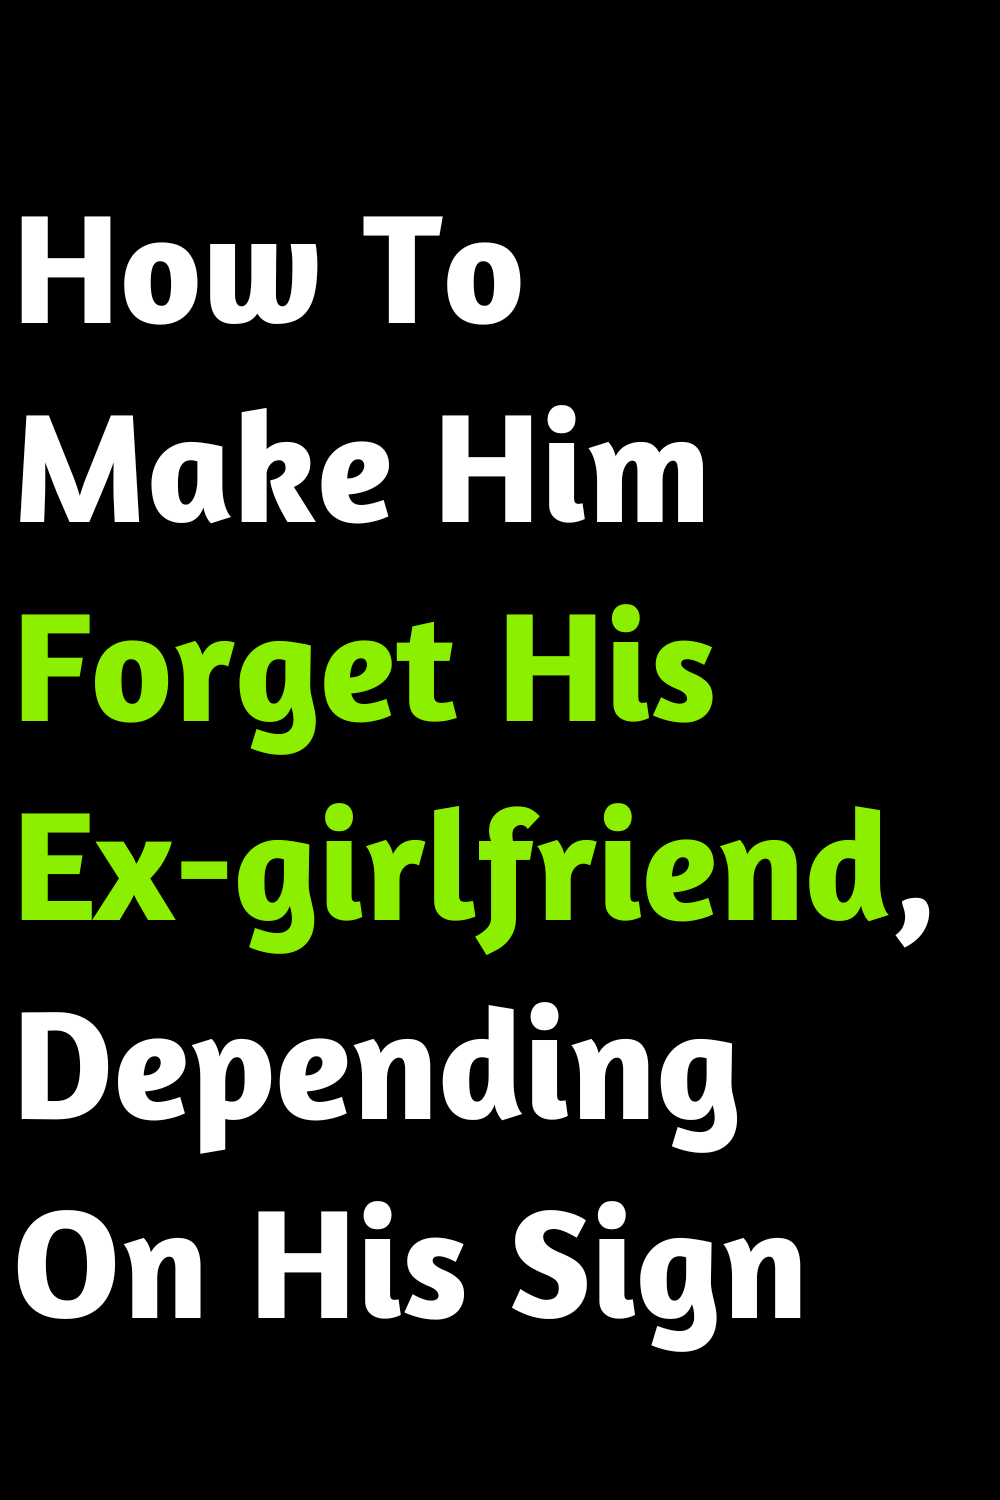 How To Make Him Forget His Ex-girlfriend, Depending On His Sign